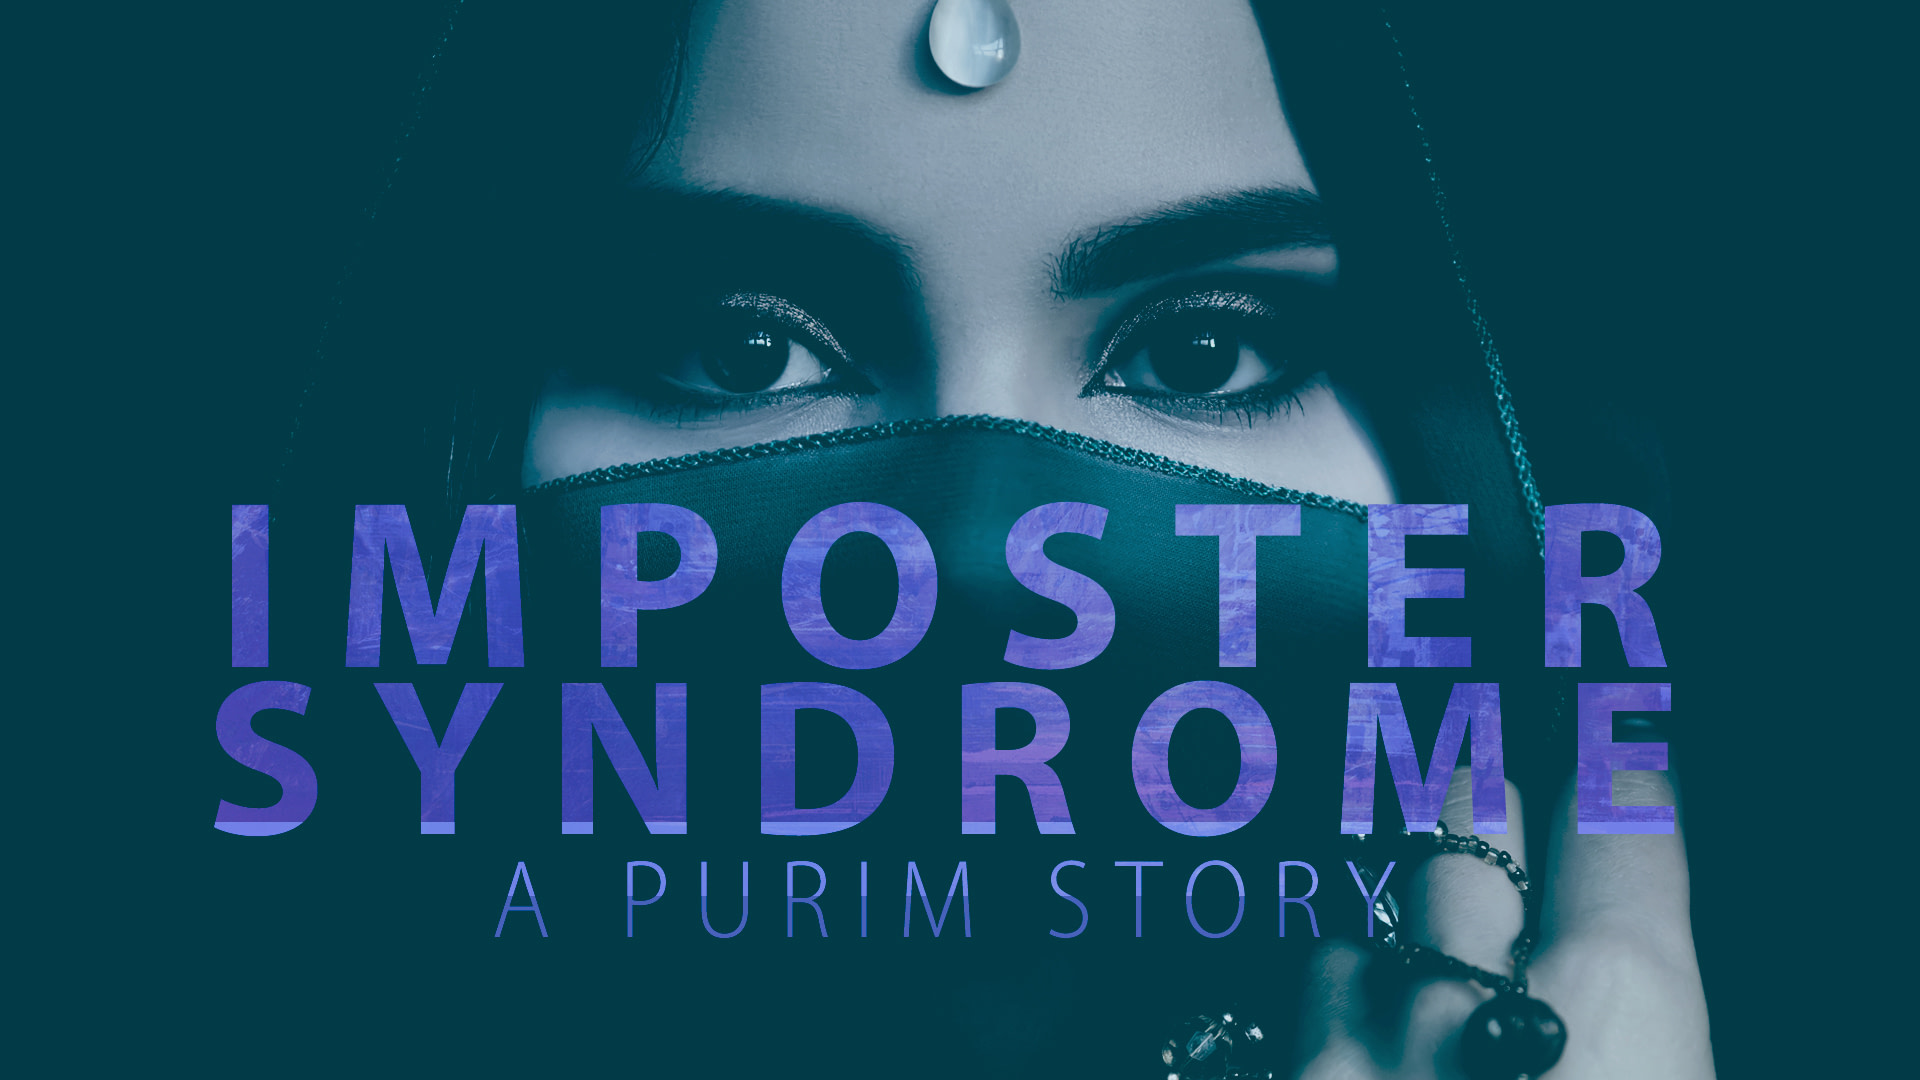 IMPOSTER SYNDROME – A Purim Story